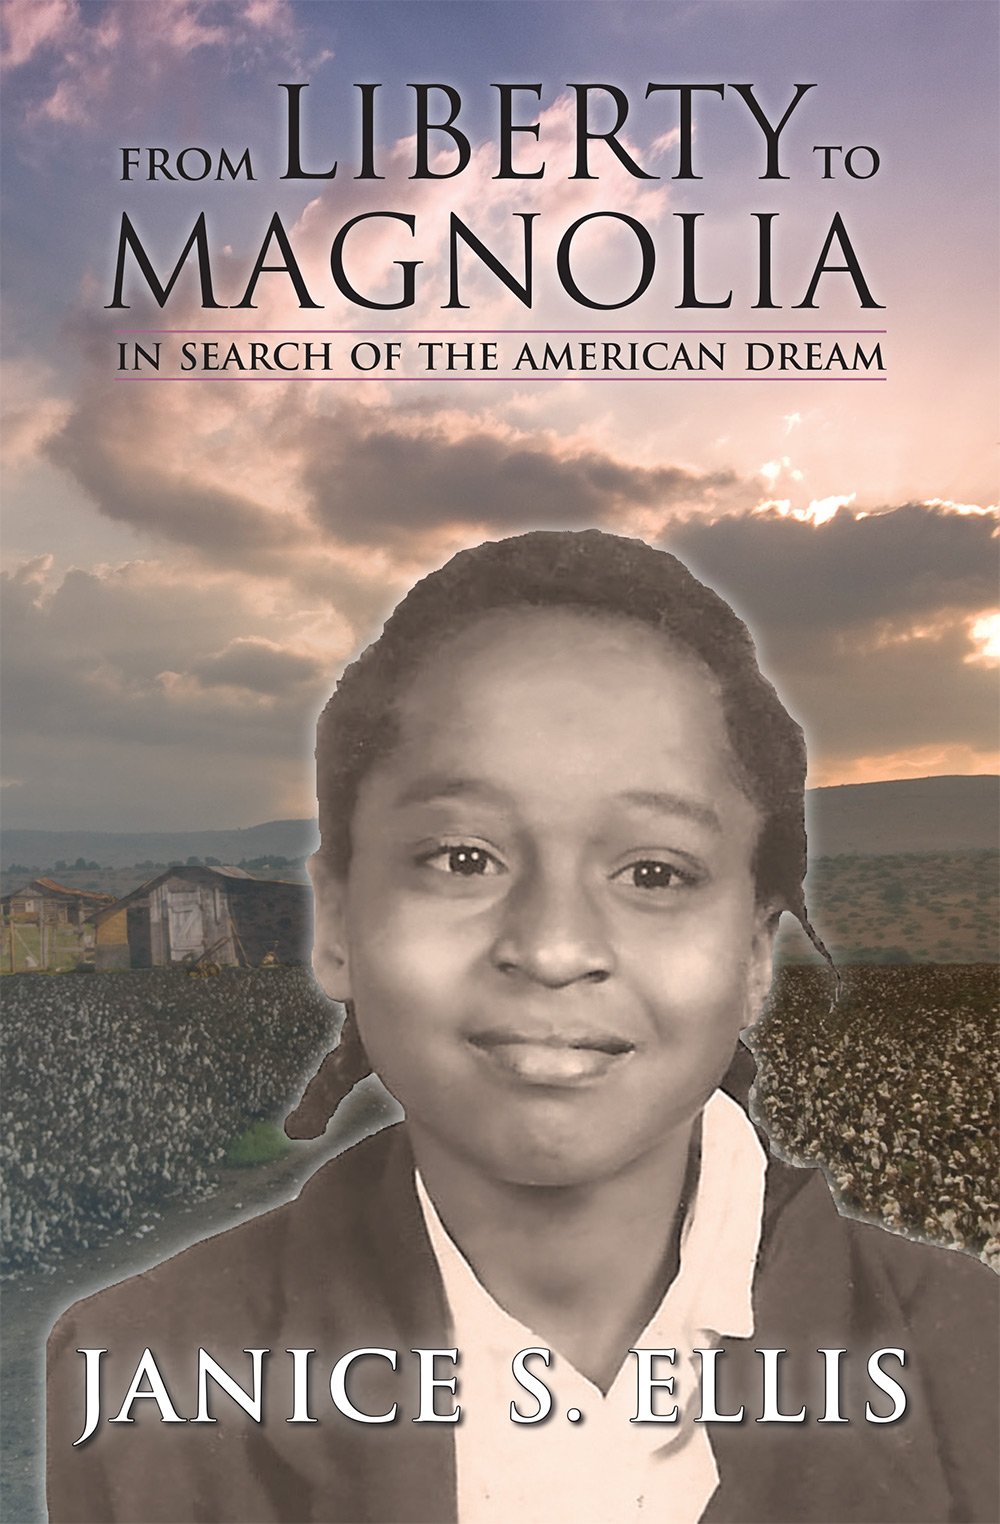 From LIberty to Magnolia by Janice S. Ellis